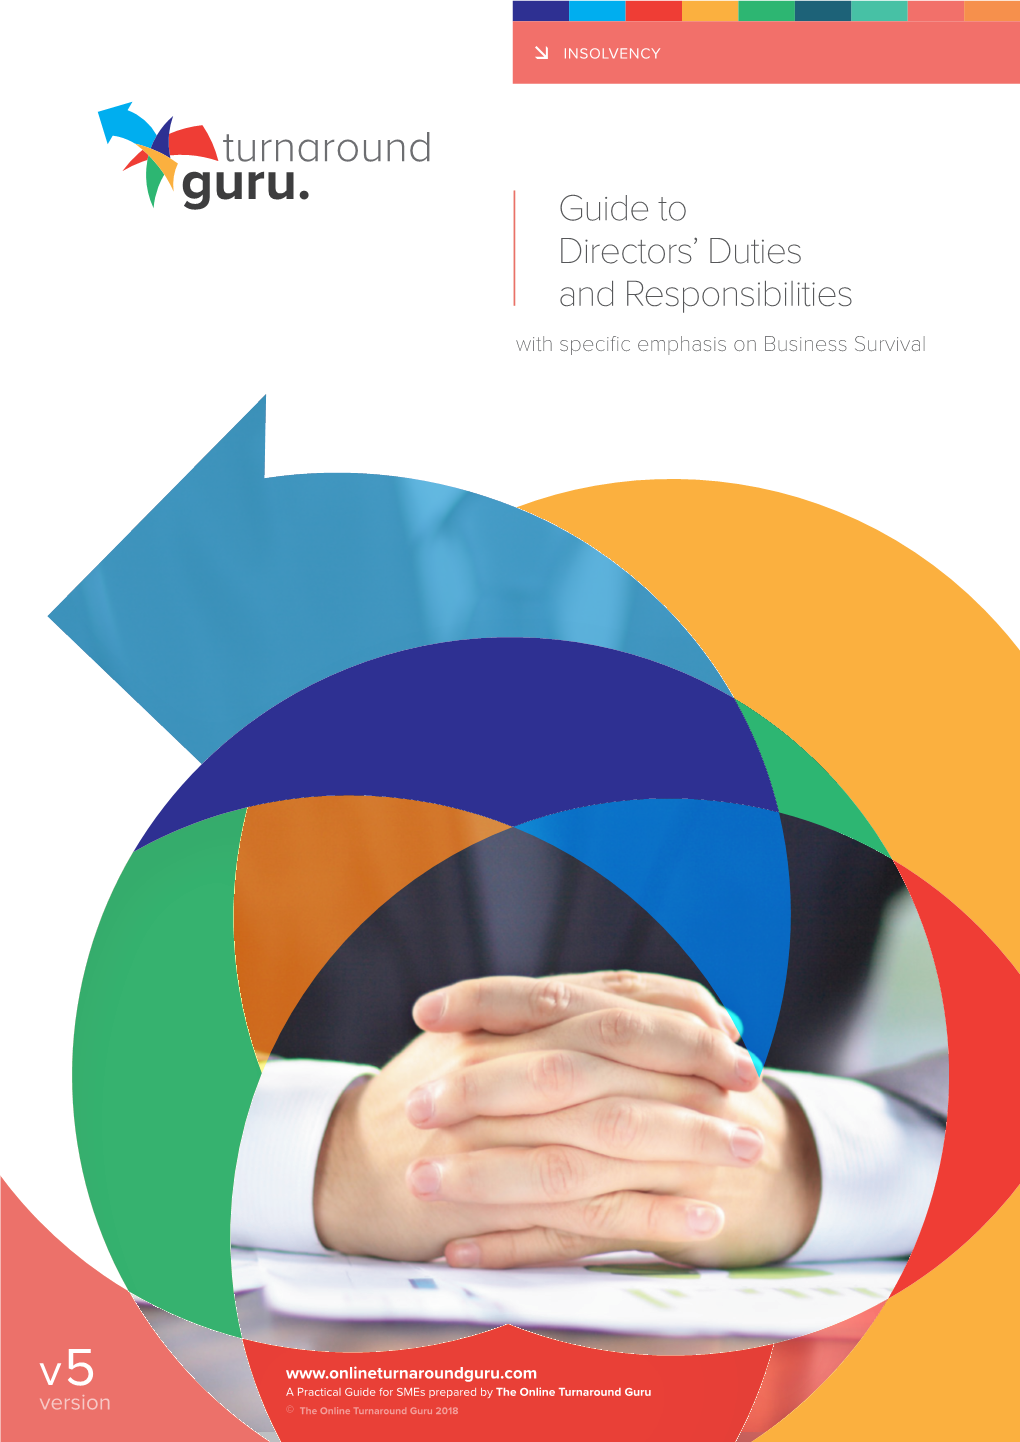 Guide to Directors' Duties and Responsibilities